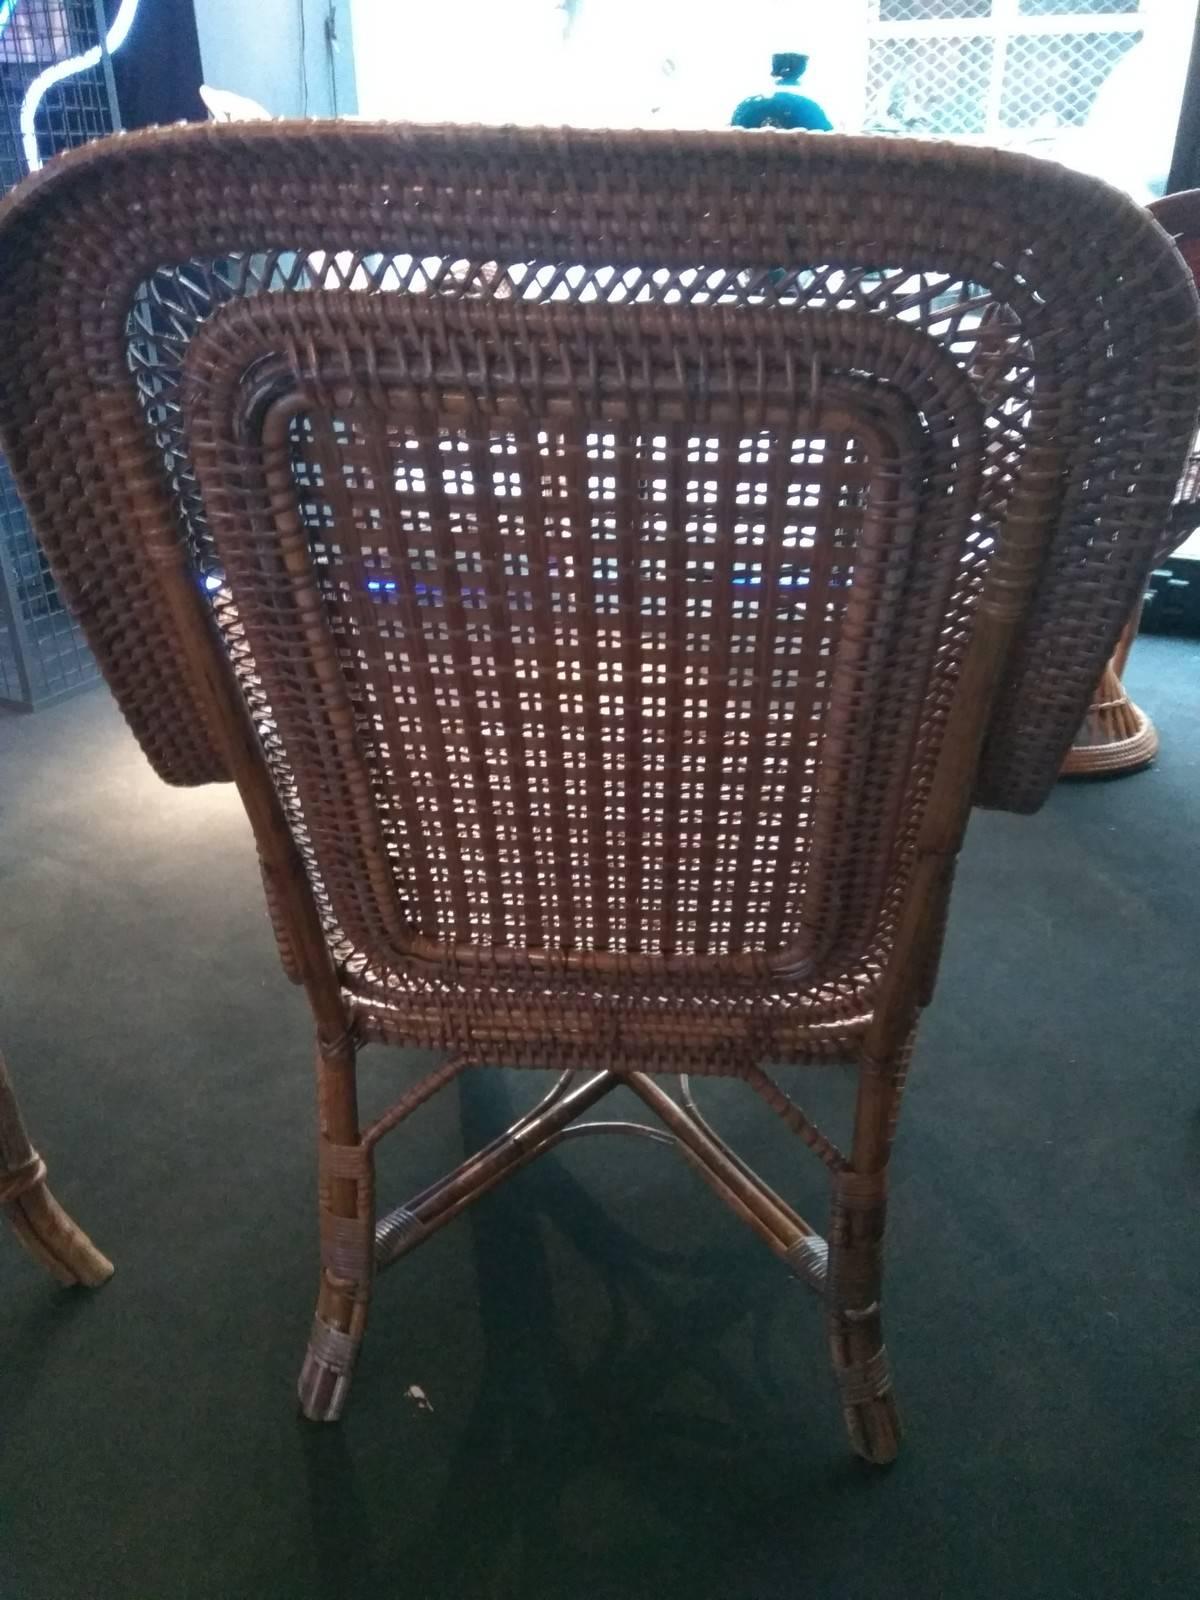 Pair of rattan armchairs realized by Perret & Vibert Manufactory at the end of 19th century.

The taste for exoticism during the Second Empire explains the enthusiasm for rattan furniture. It is visible with the massive import of raw materials